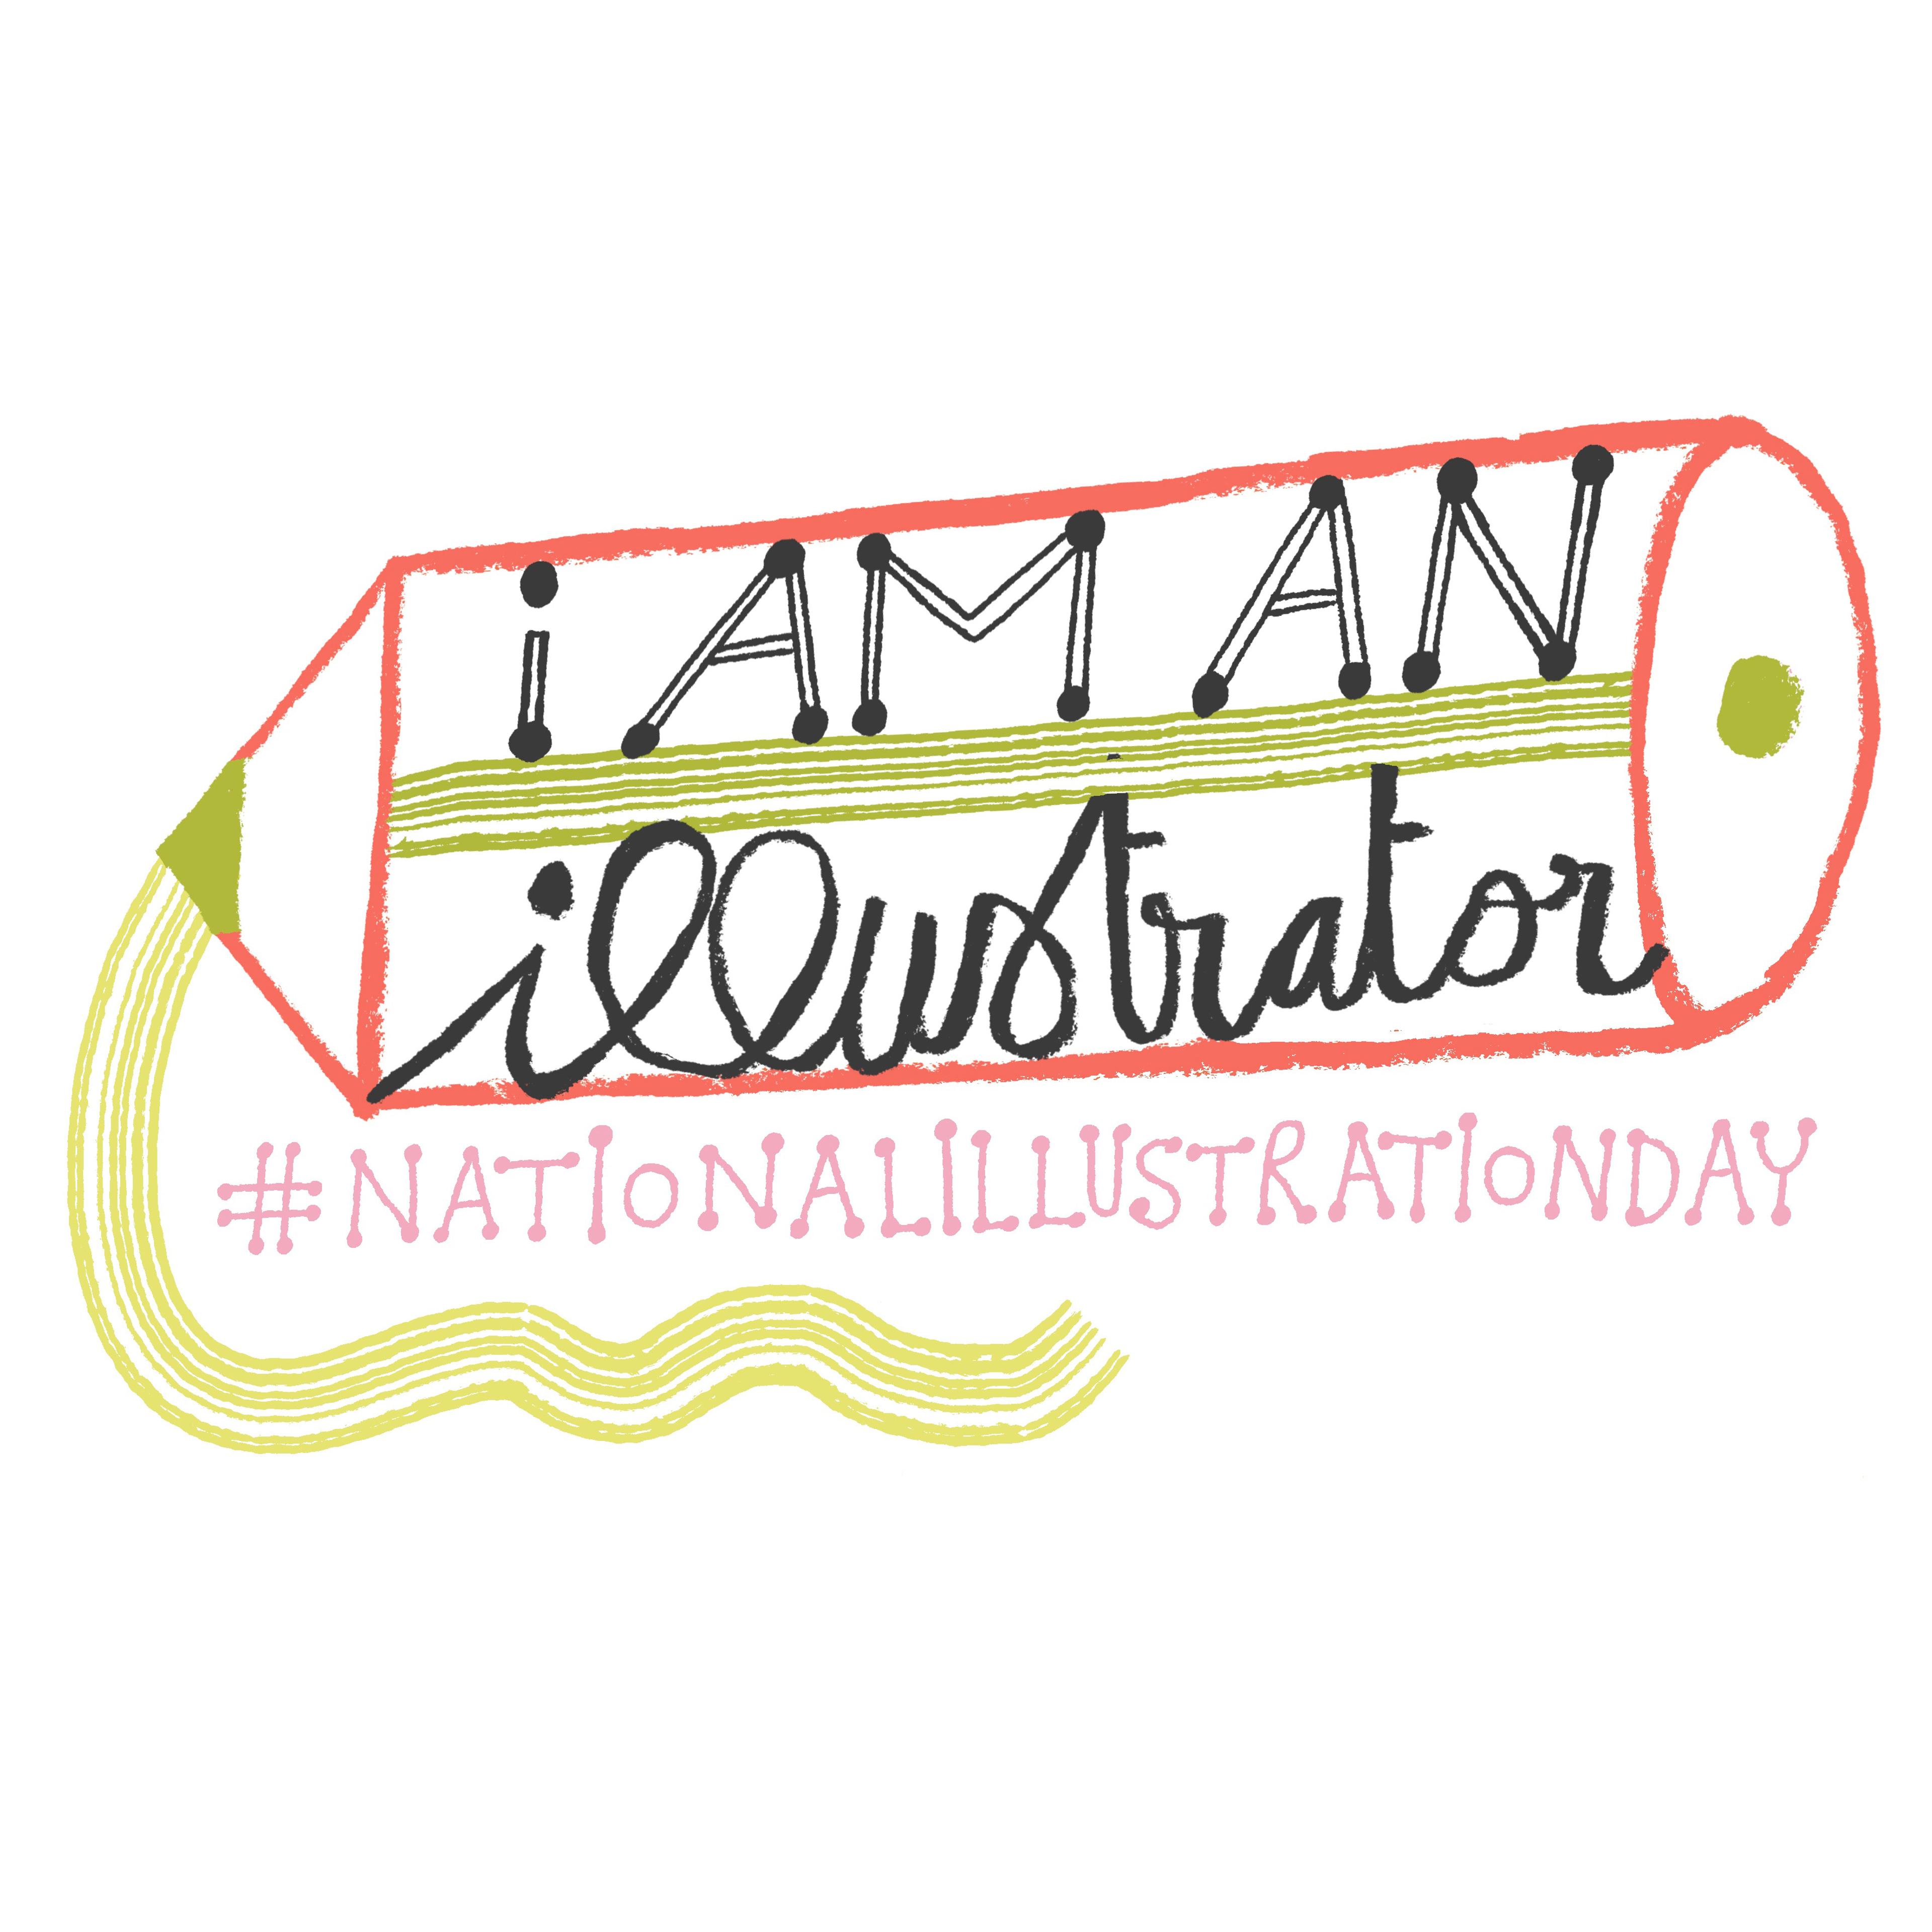 Illustration of a pencil with the wording 'I am an illustrator' and '#NationalIllustrationDay'.